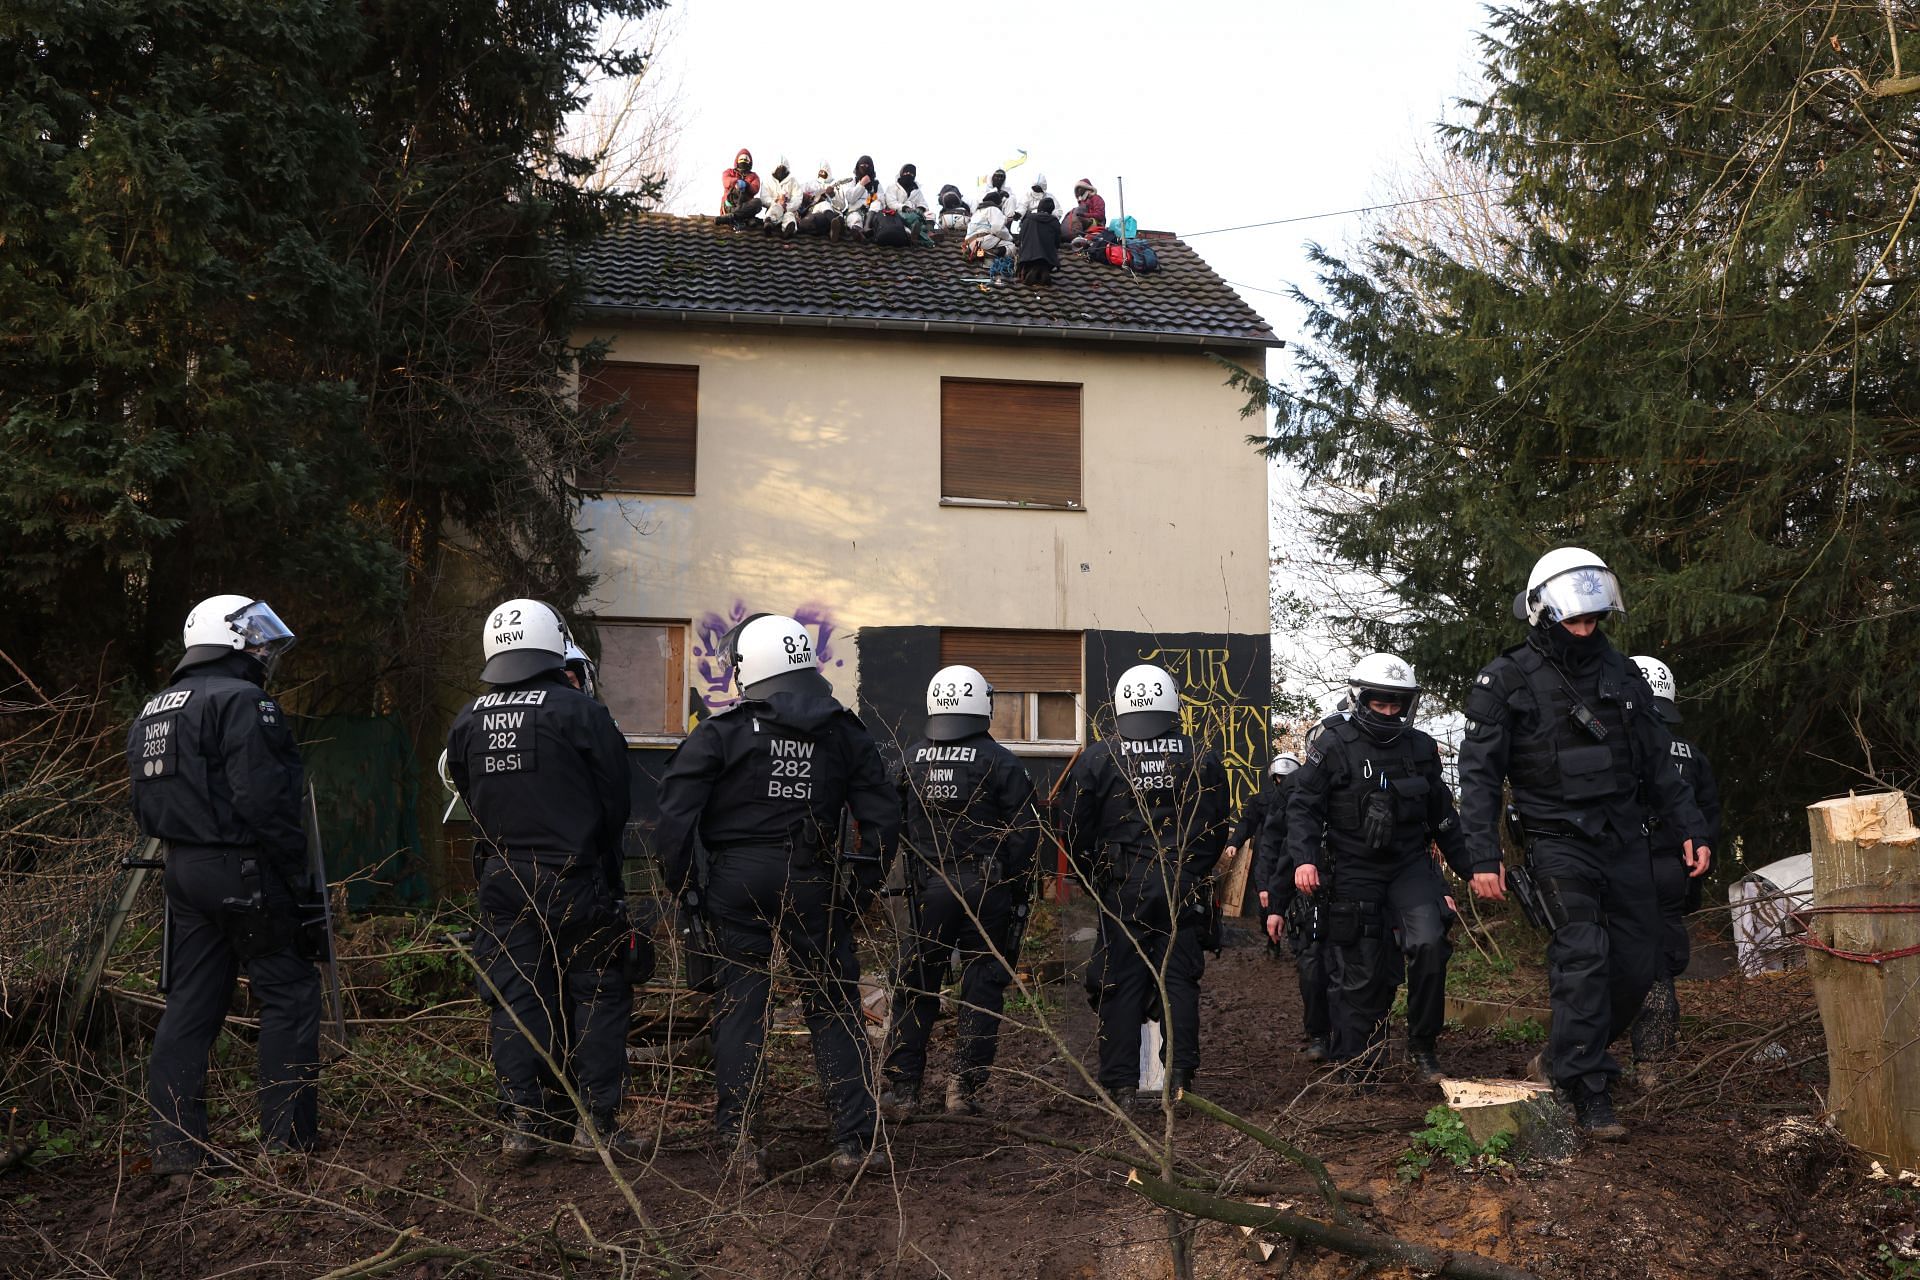 A representative image of the police force in Hunters Way (Image via Getty)